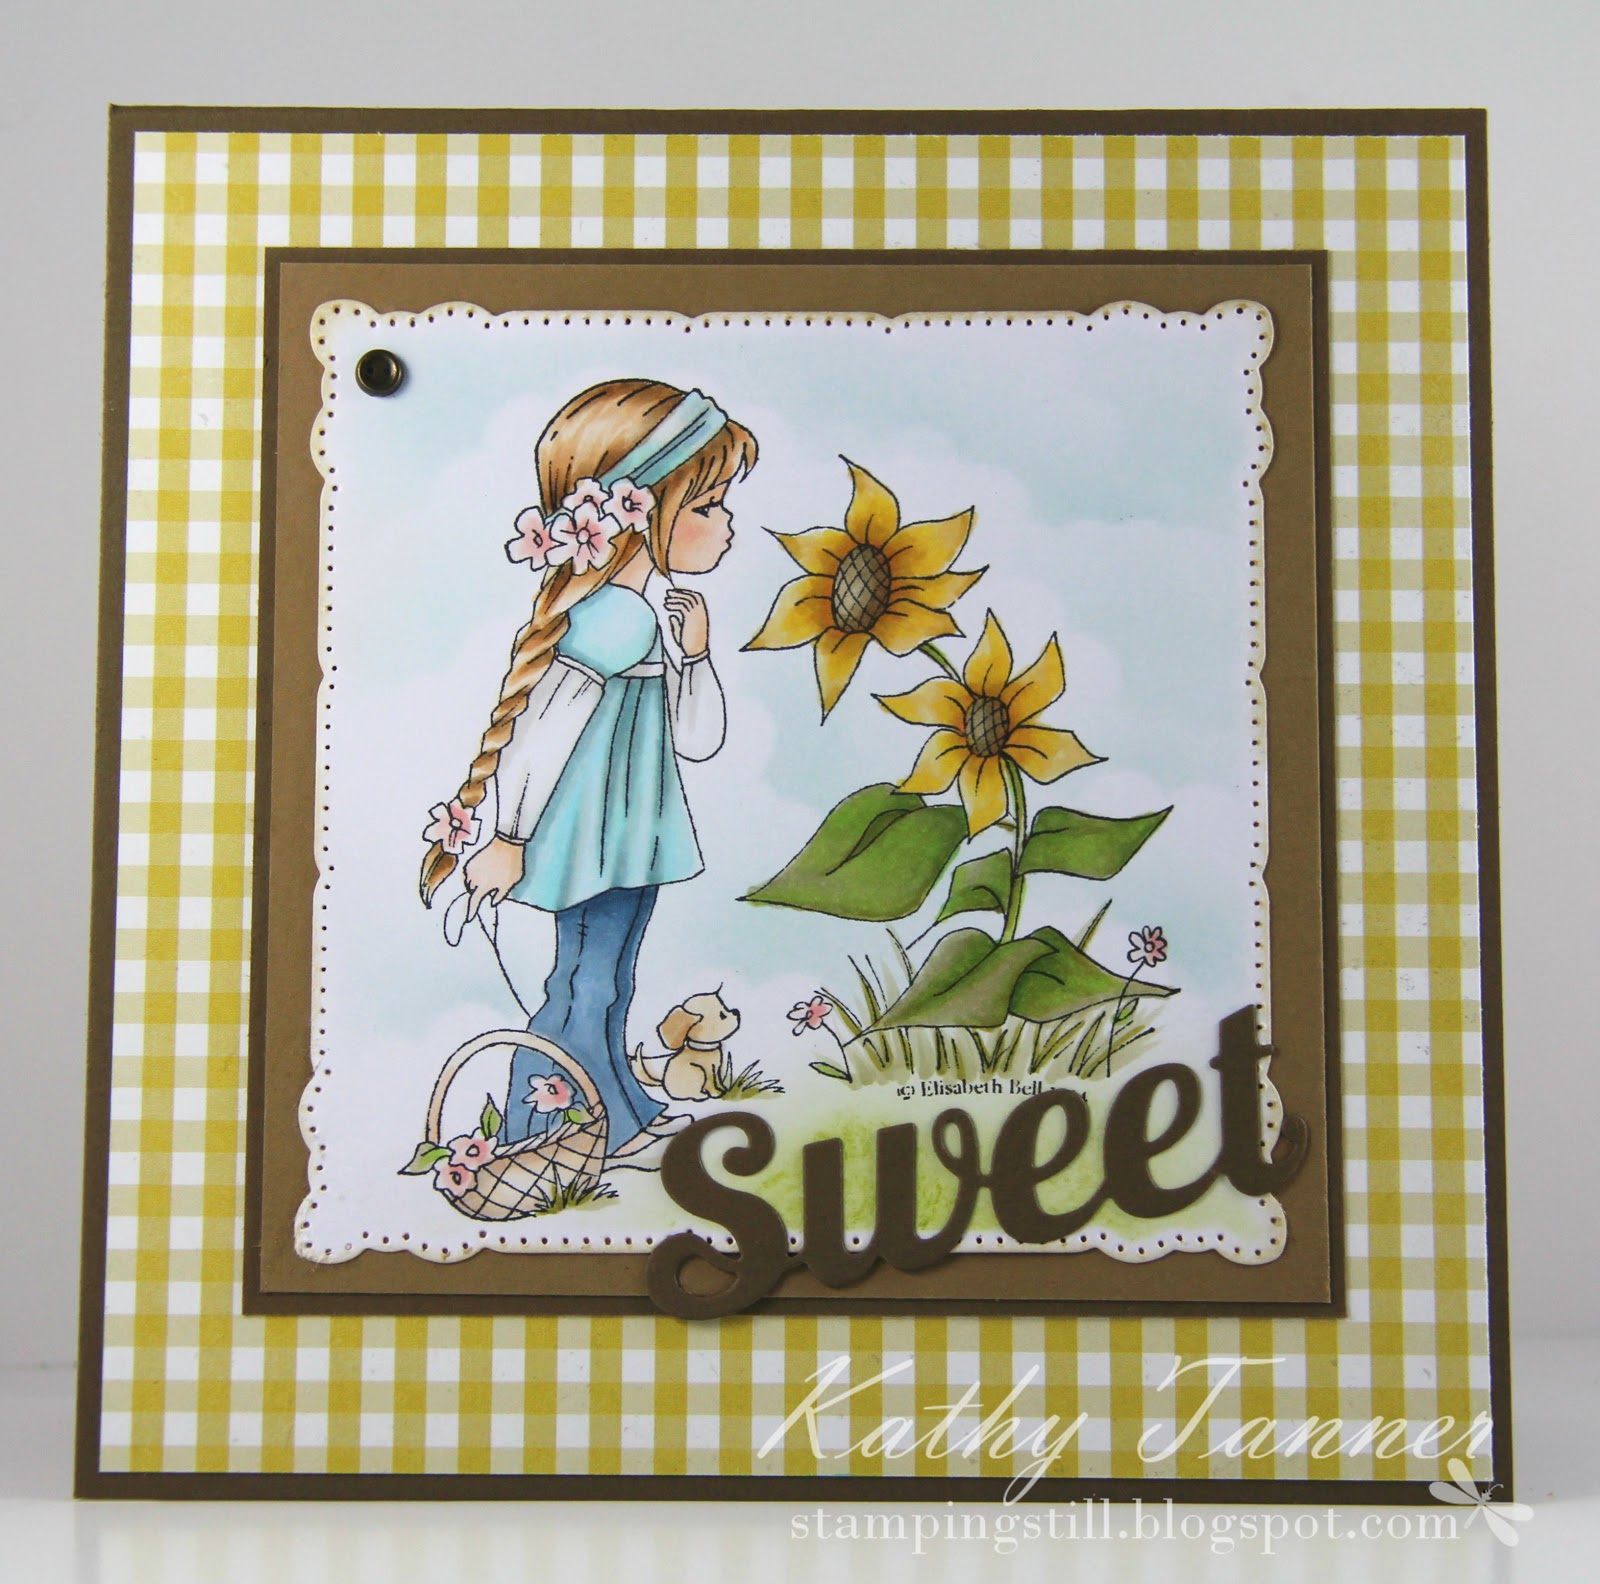 whimsy stamps, sunnydee and sunflower, sweet die